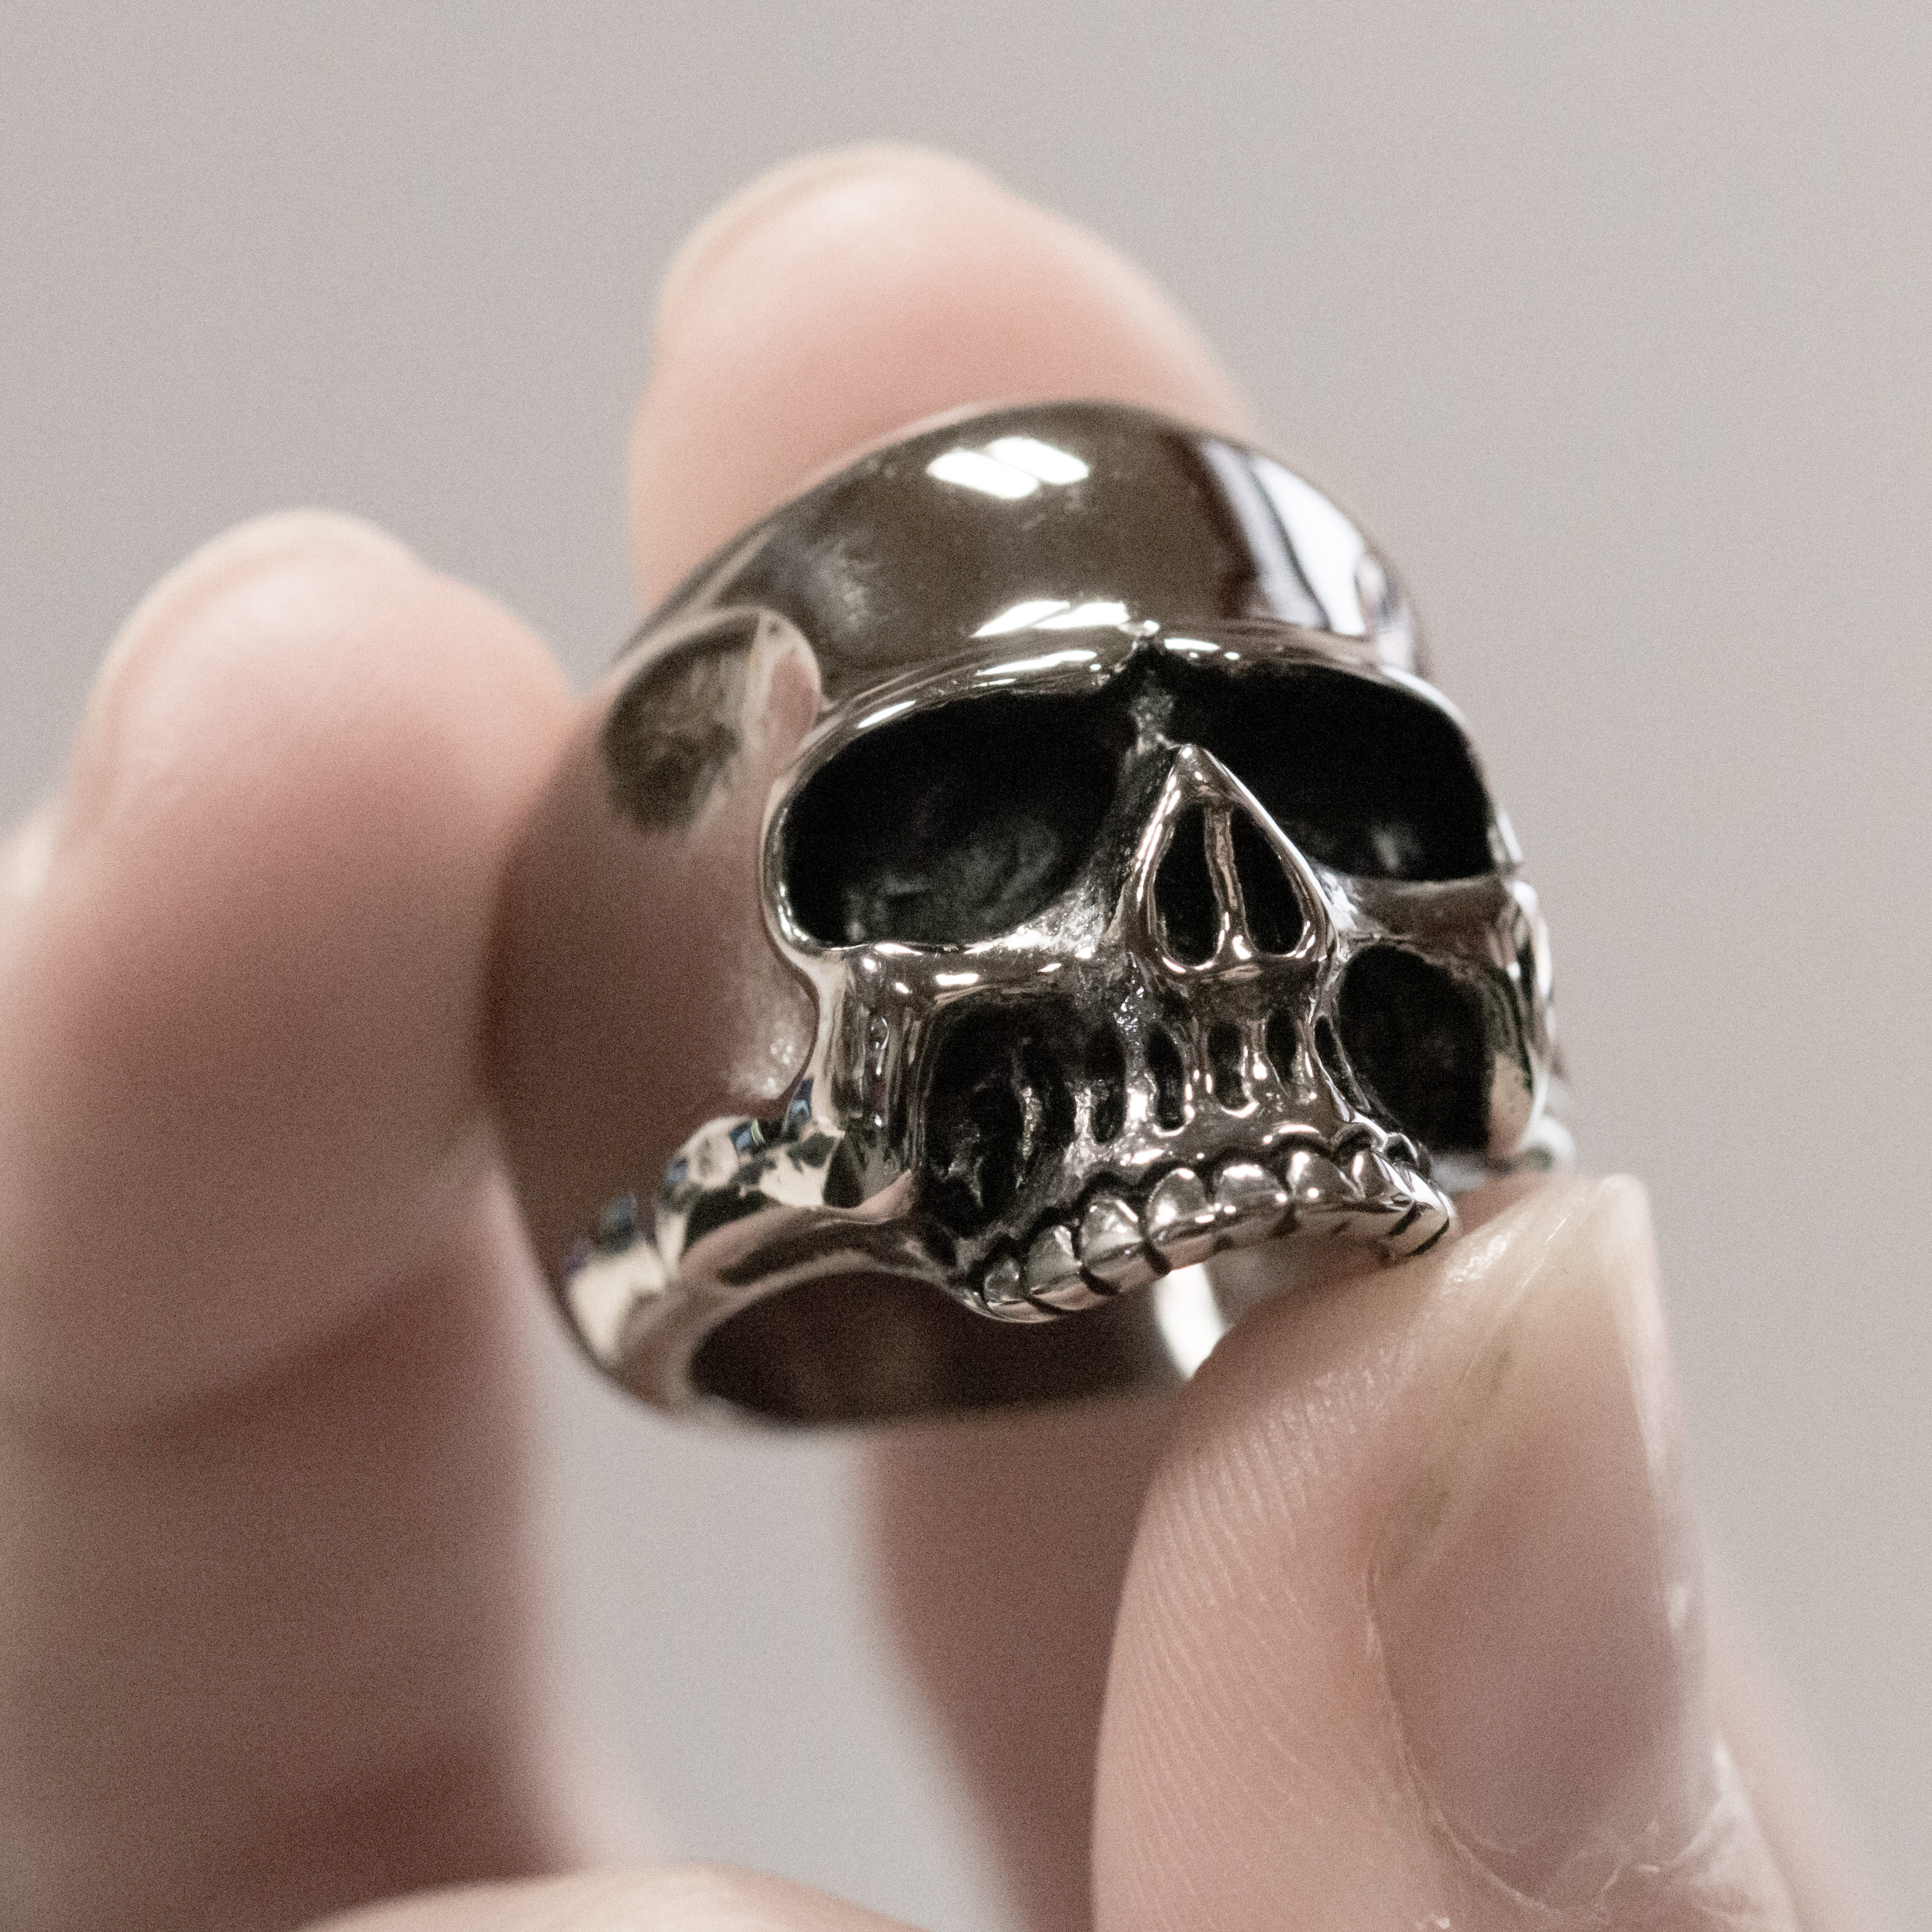     Classic Keith Richards Skull Ring made of 316L Stainless Steel